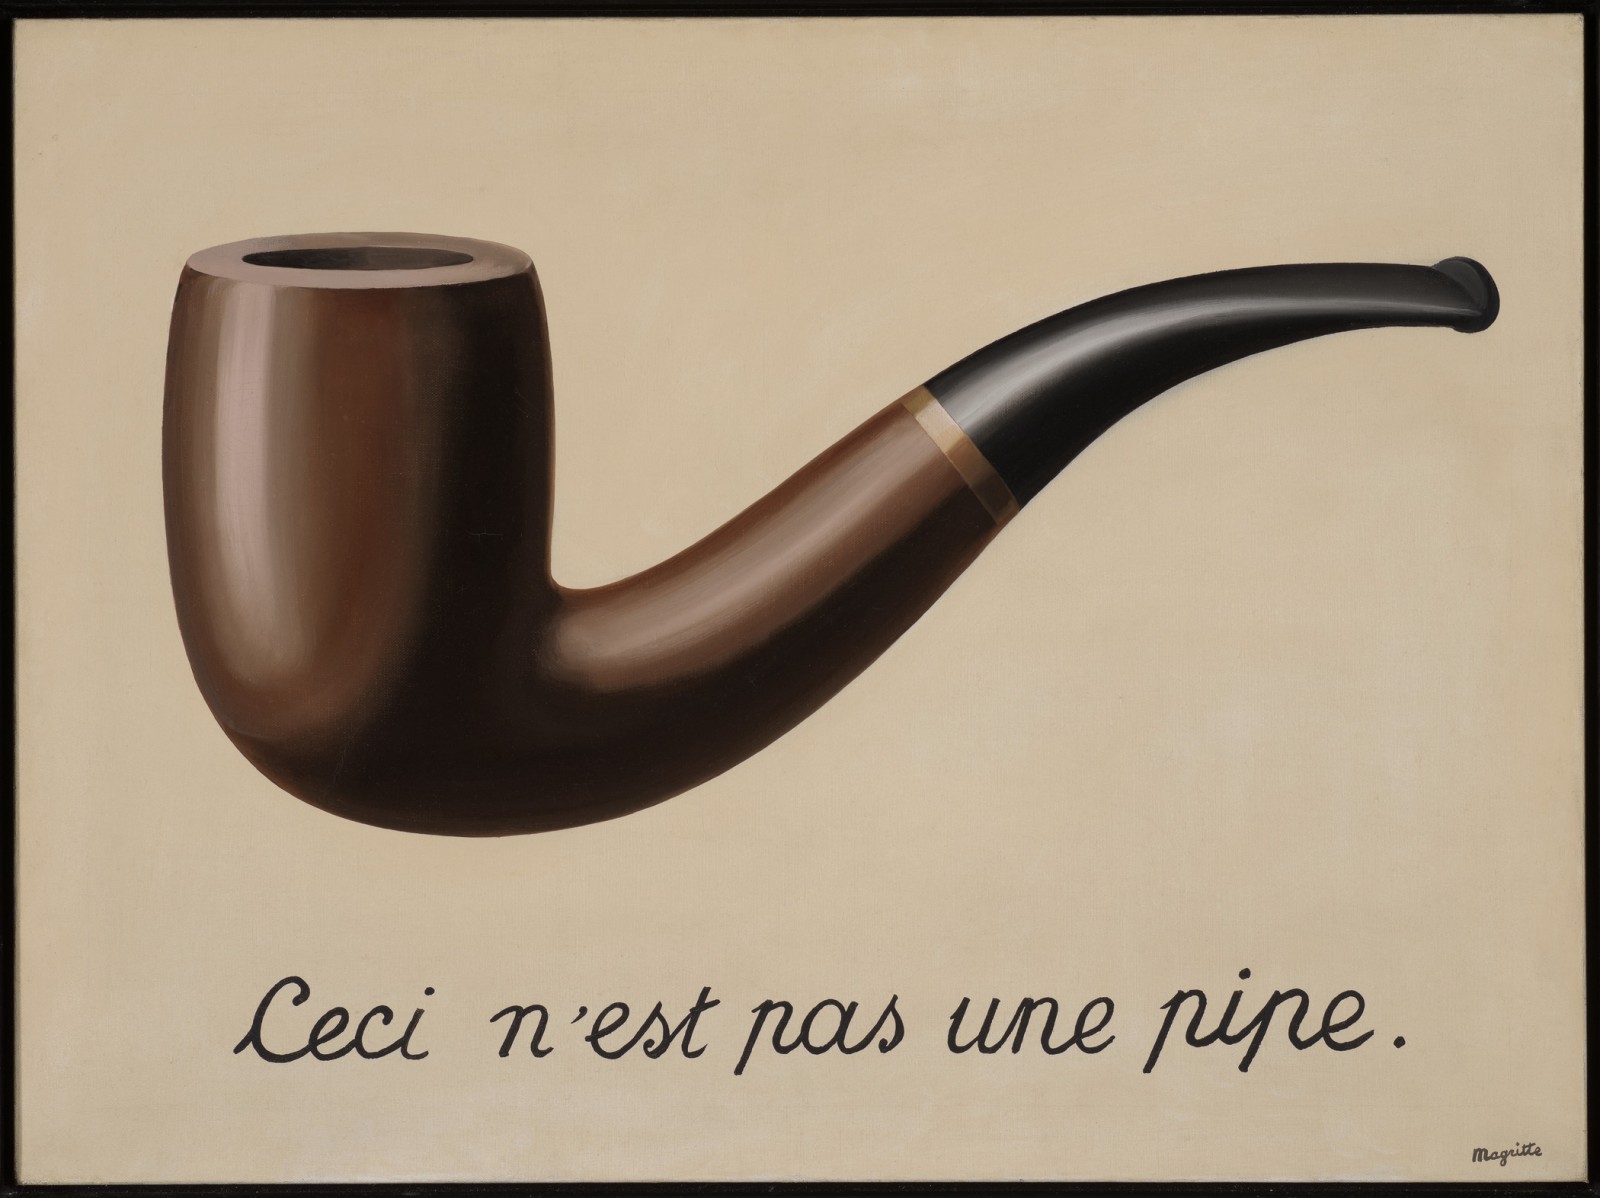 René Magritte, The Treachery of Images (This is Not a Pipe)